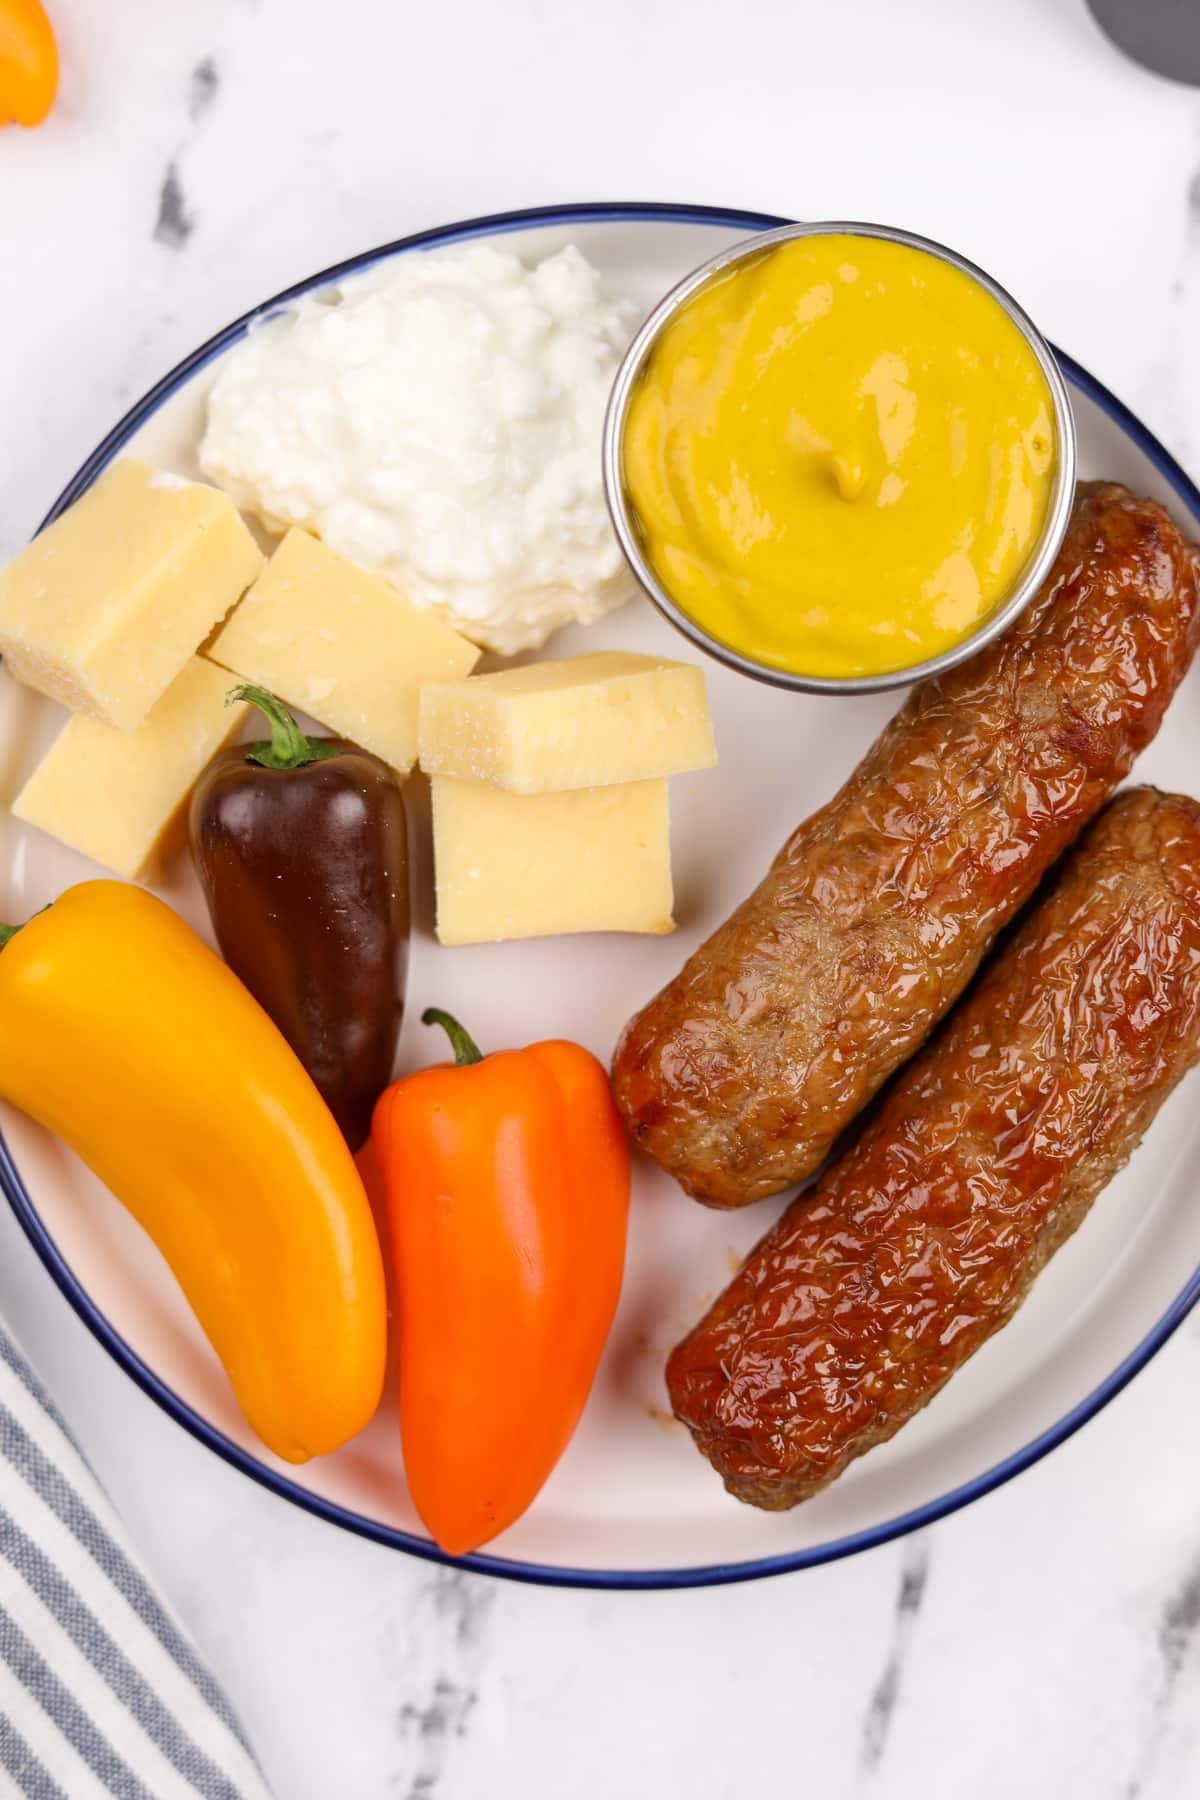 A plate filled with veggies, cheese, and chicken sausages.